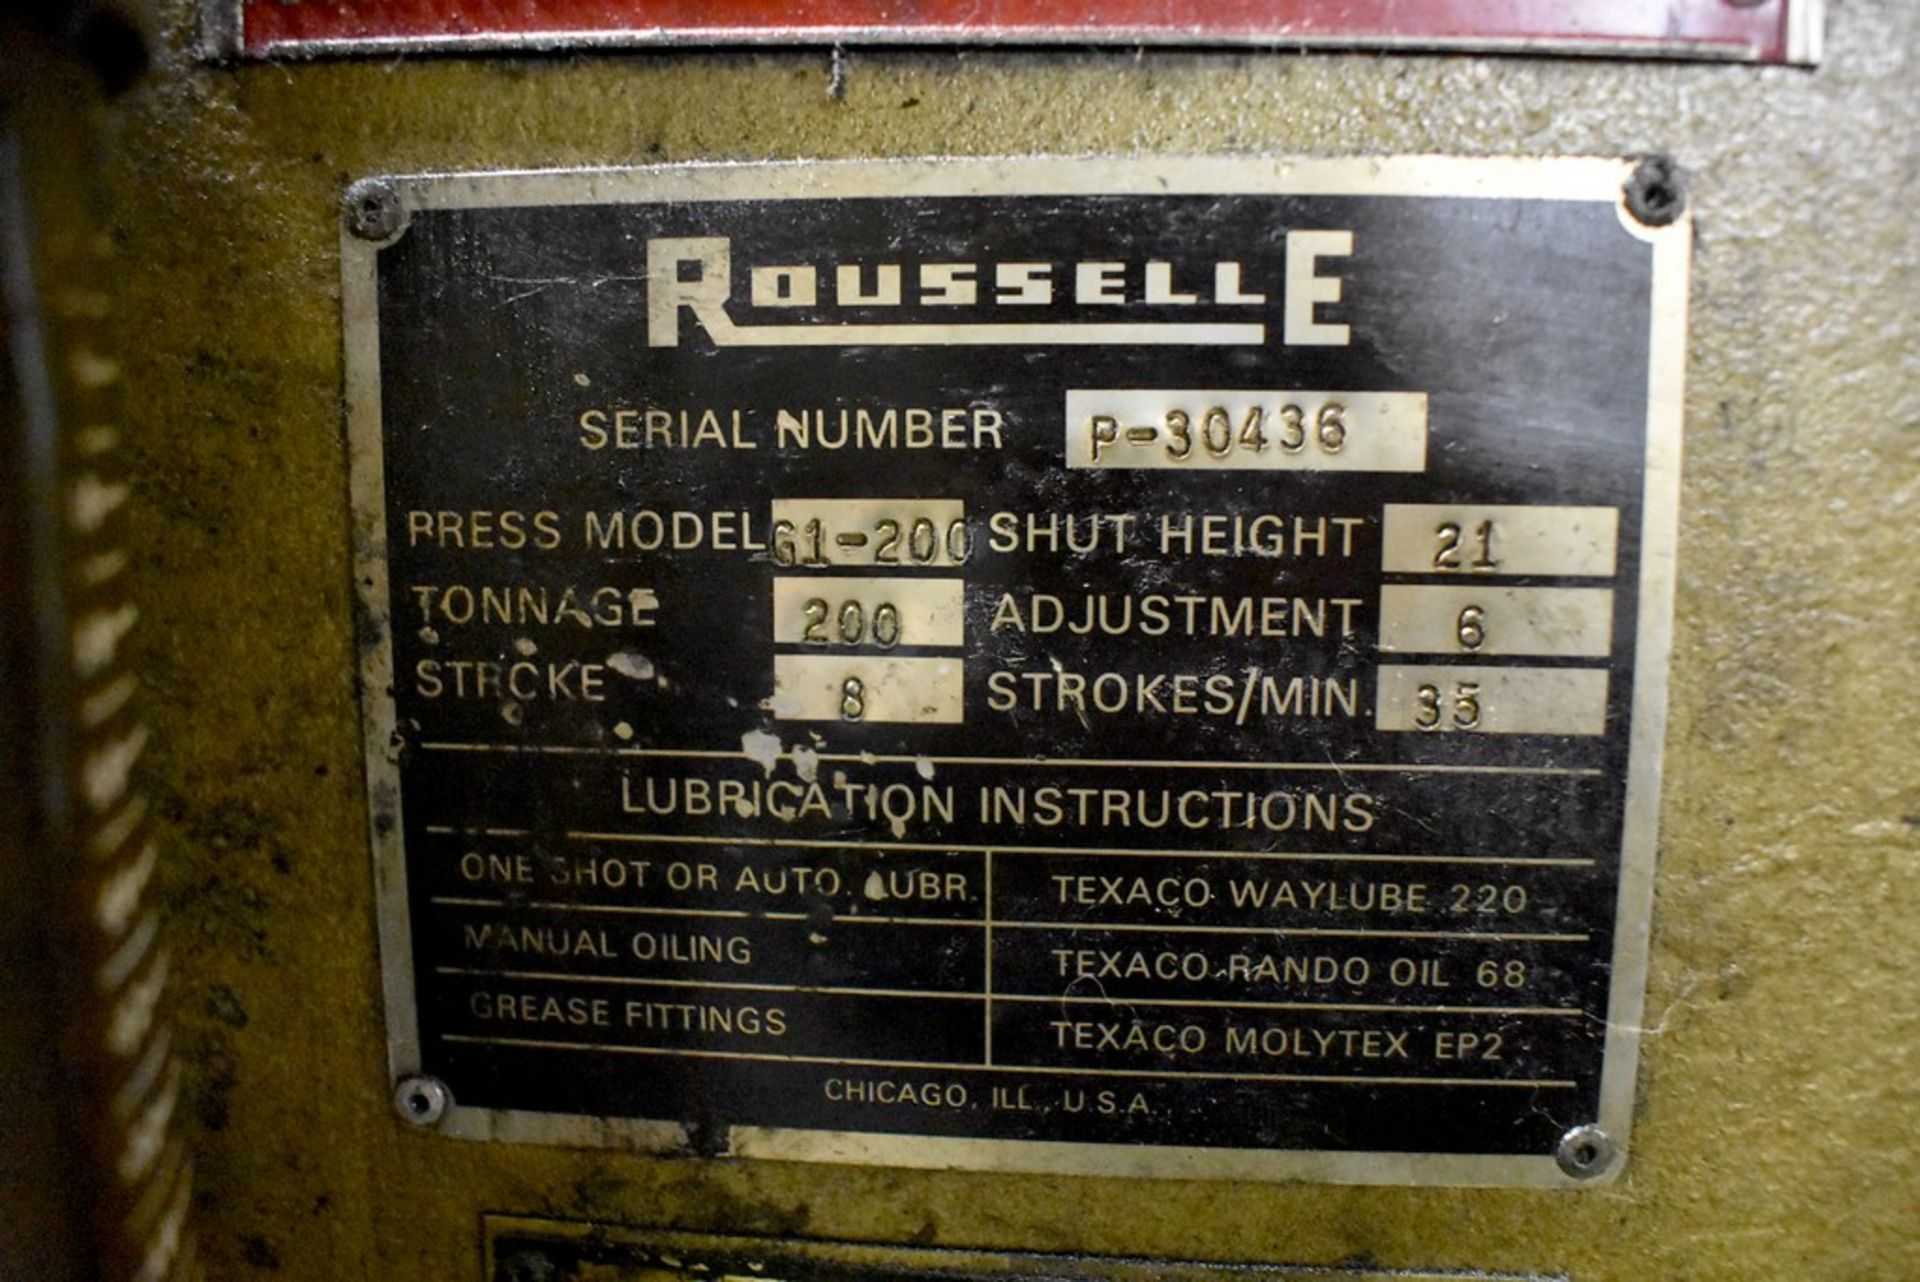 Rousselle Model G1-200 Back Geared Gap Frame Punch Press, 200 Ton - 8" Stroke - 32" x 50" Bed Area - - Image 8 of 11